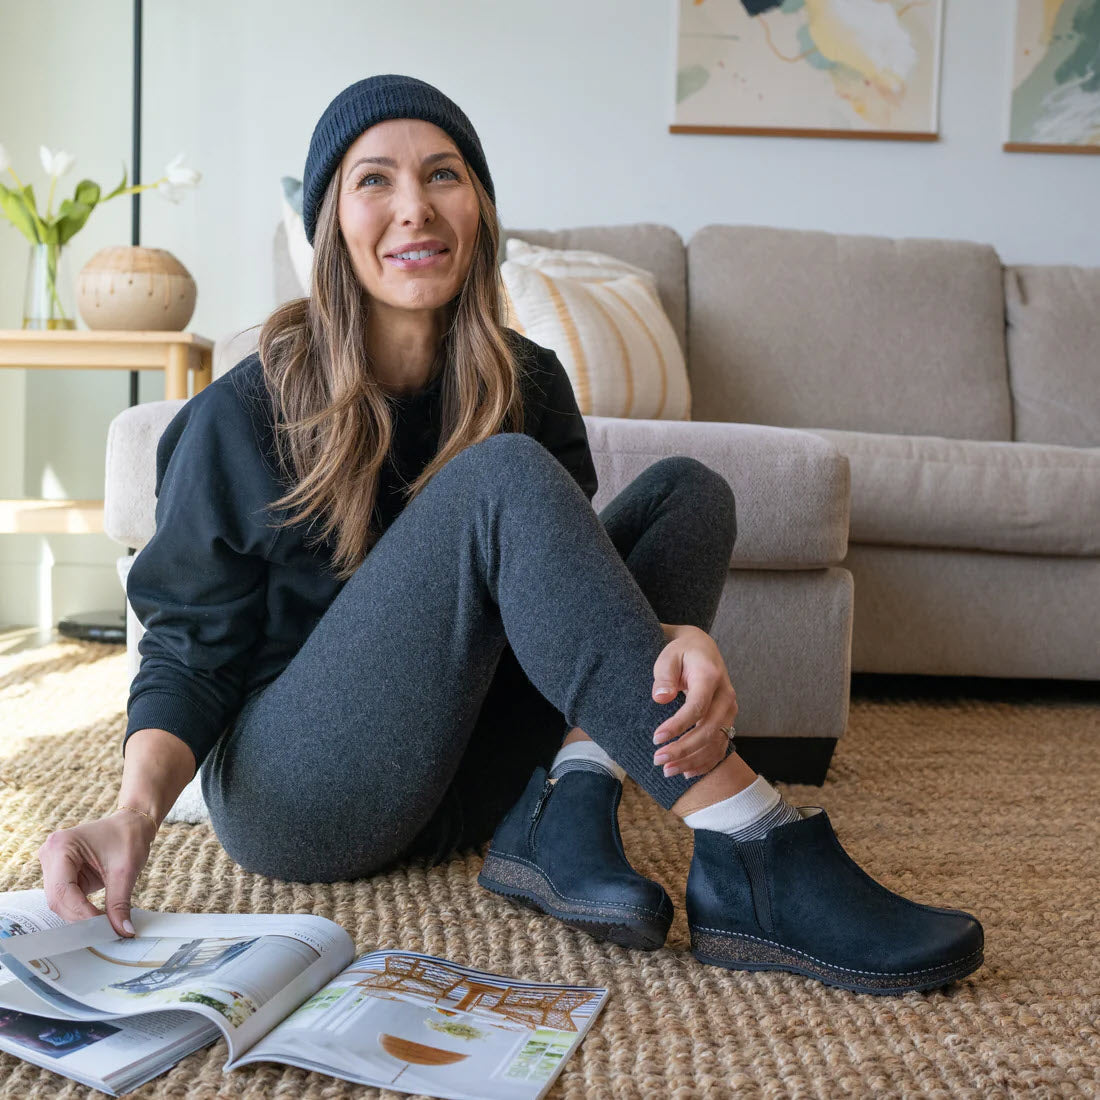 Woman in casual attire and Dansko Makara booties sitting on the floor of a living room, reading a magazine, with a smile on her face and maps on the wall behind.